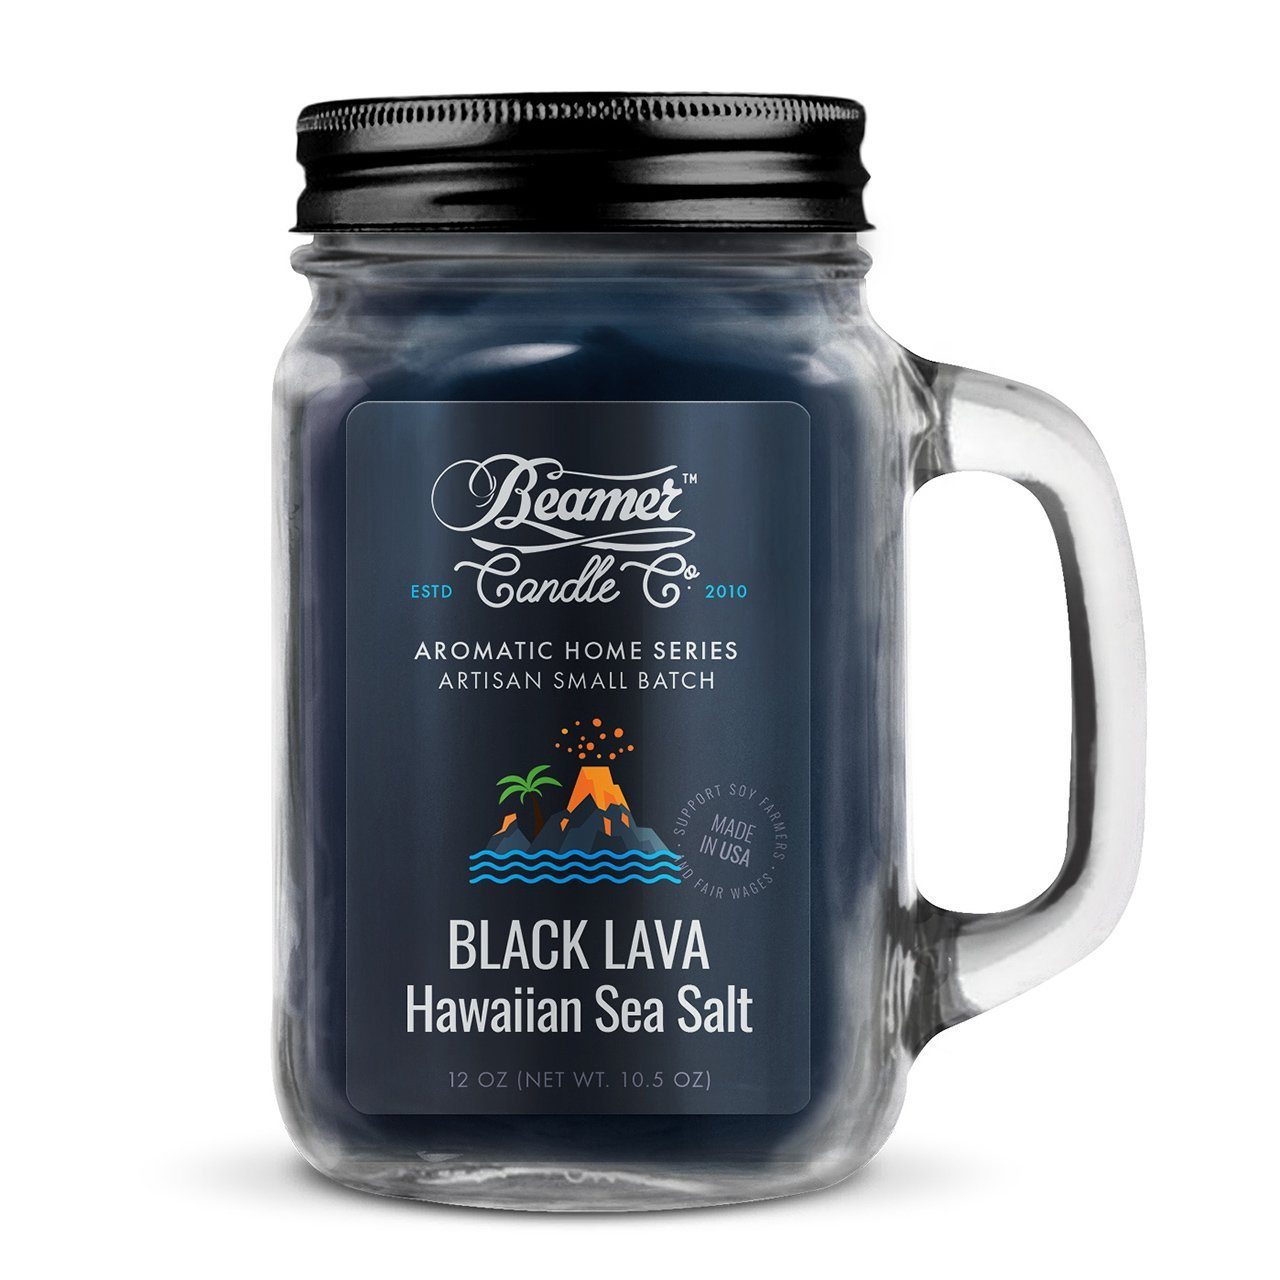 Beamer Candle Company - Aromatic Home Series - 12oz Mason Jar - Various Scents - (1 Count) Flower Power Packages Black Lava Hawaiian Sea Salt 